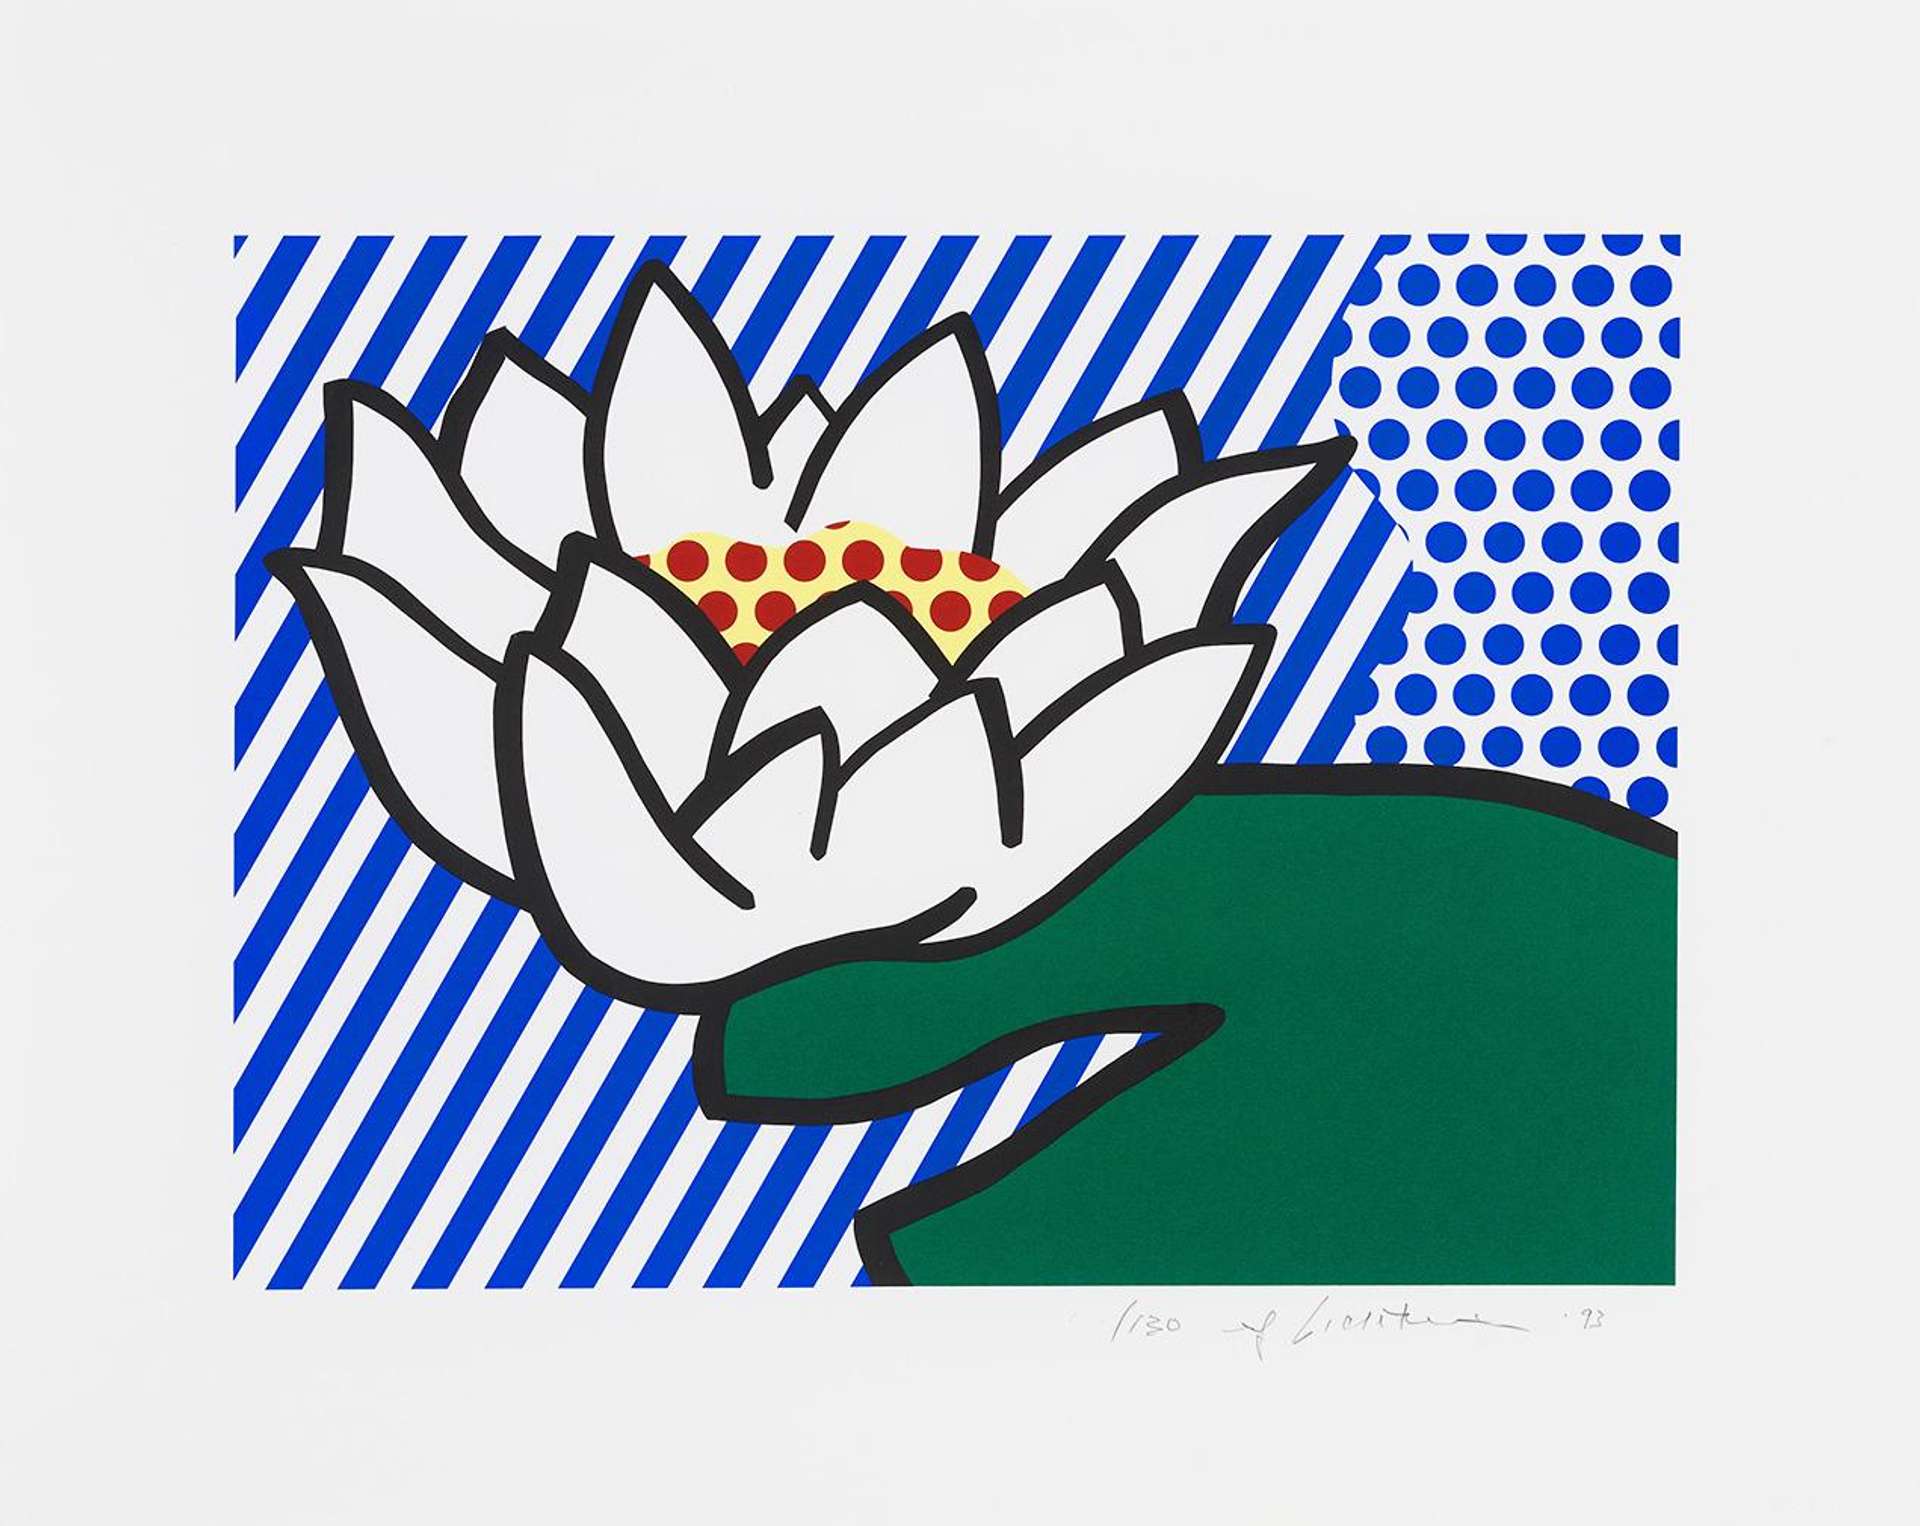 This work is a brilliant screen print that integrates machine-made patterns with painterly gestures. Water Lily captures a single enlarged water lily with white petals and dark green leaves resting on the water. The botanical elements have been flattened against the picture plane through cropping and accentuated through thick black contouring. The water’s surface is composed entirely out of vivid blue stripes and a dense streak of dots.